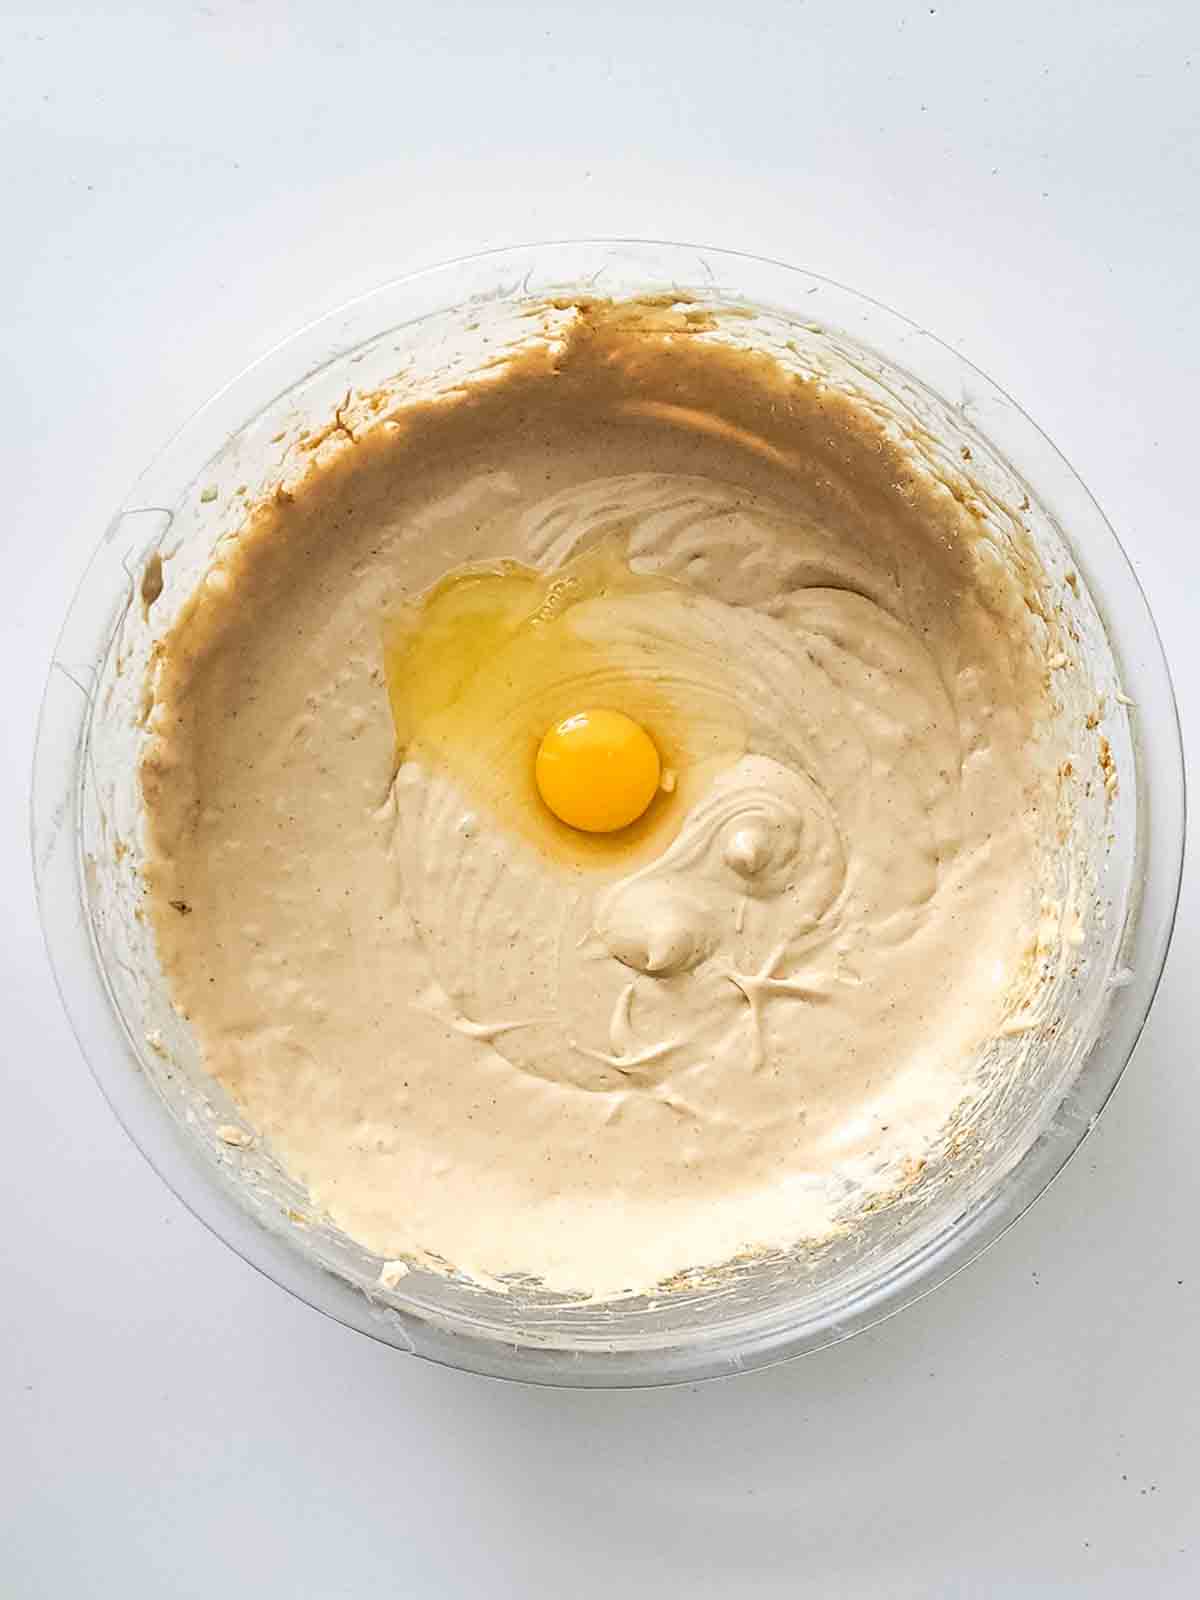 Ann egg cracked into the cheesecake filling in a glass bowl.